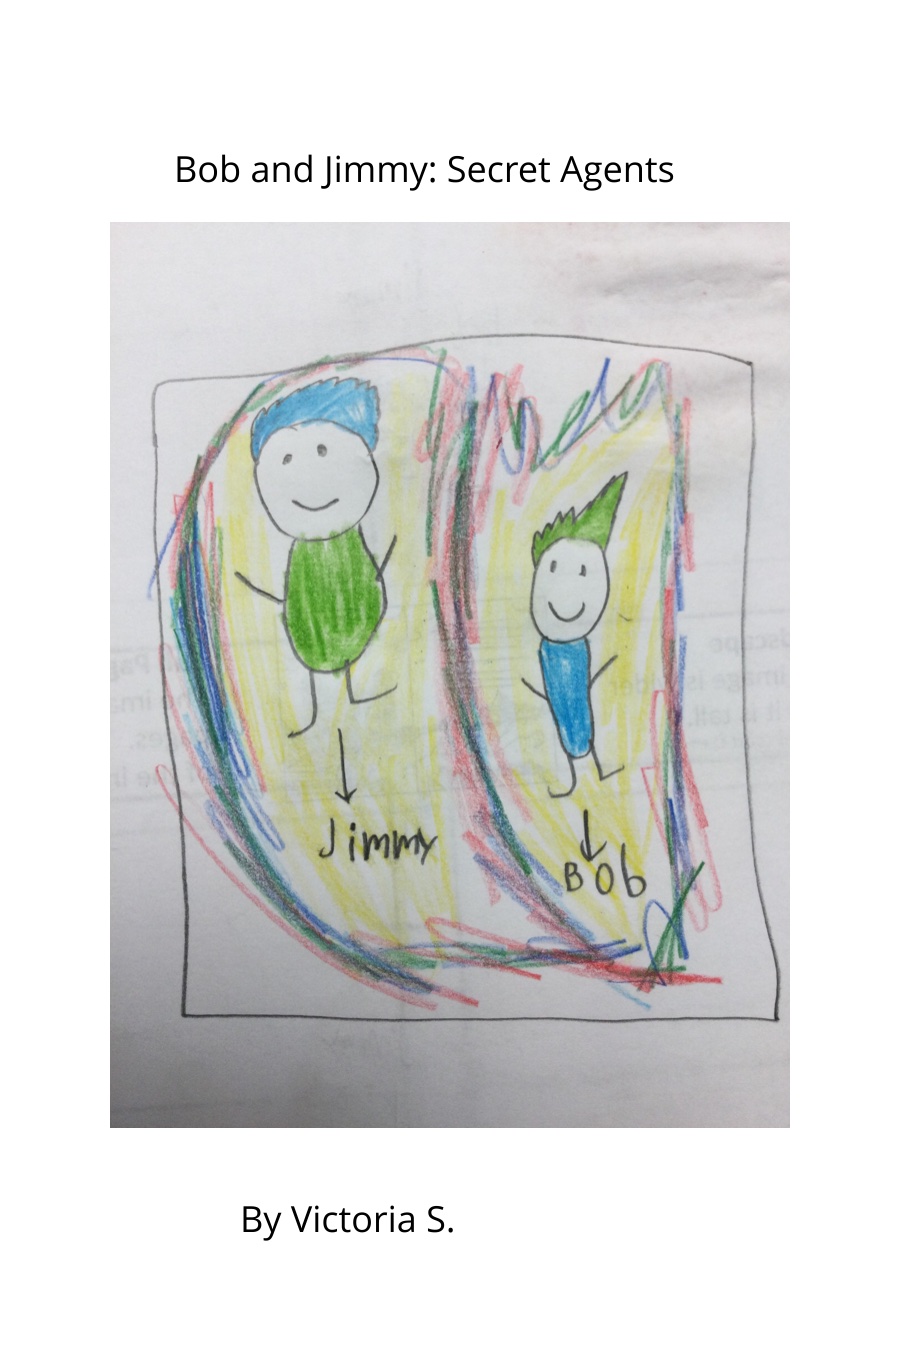 Bob and Jimmy Secret Agents by Victoria S